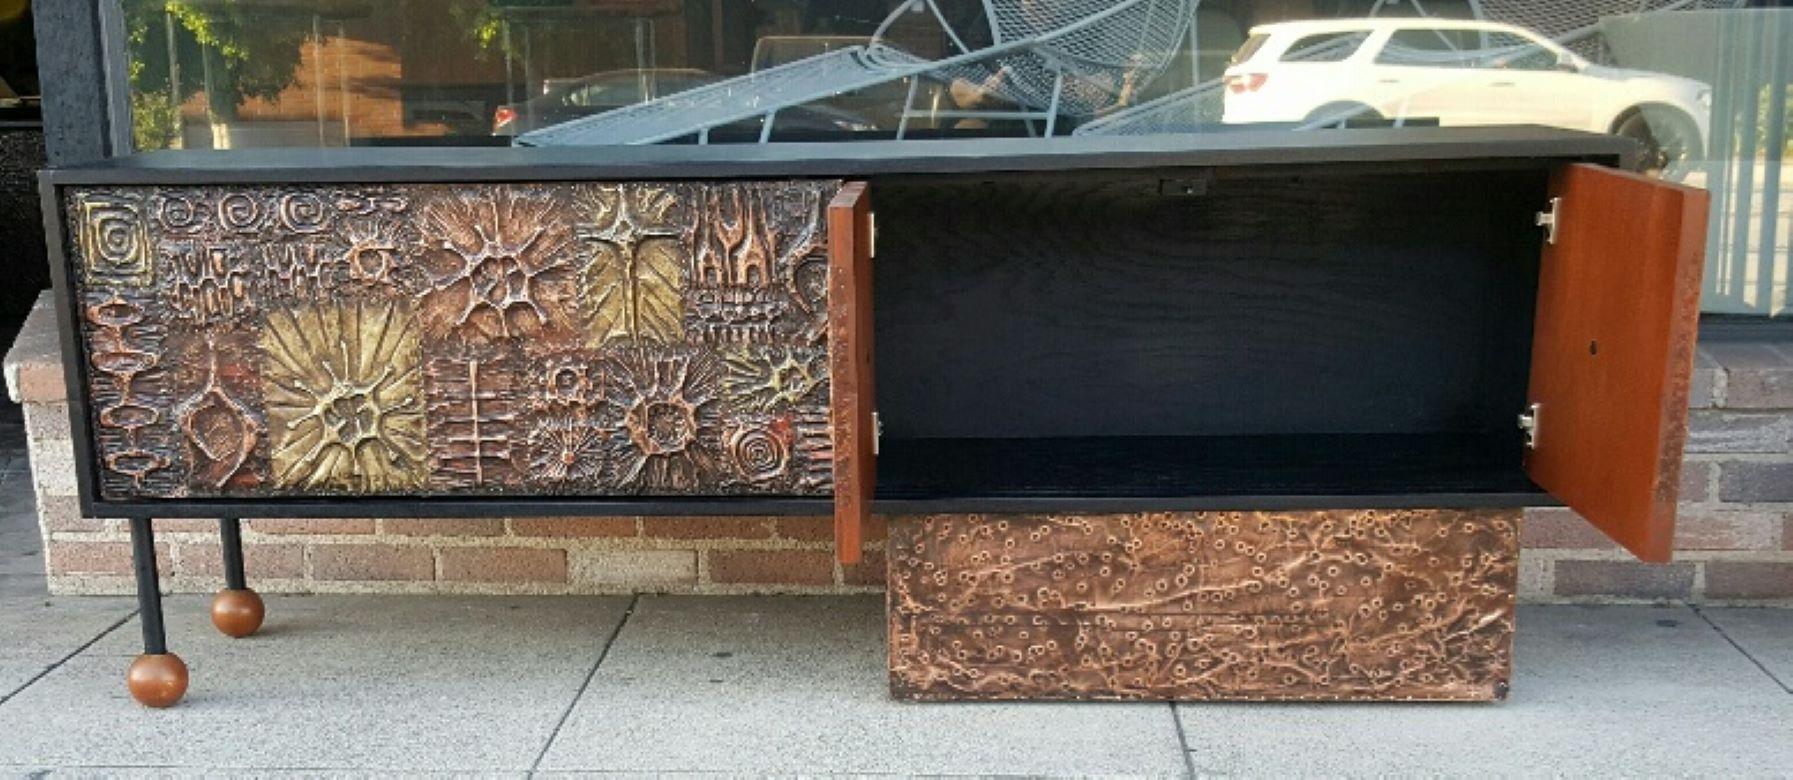 1970 Mid-Century Modern Walnut Credenza with Brutal Copper Tiles by Lou Ramirez 2